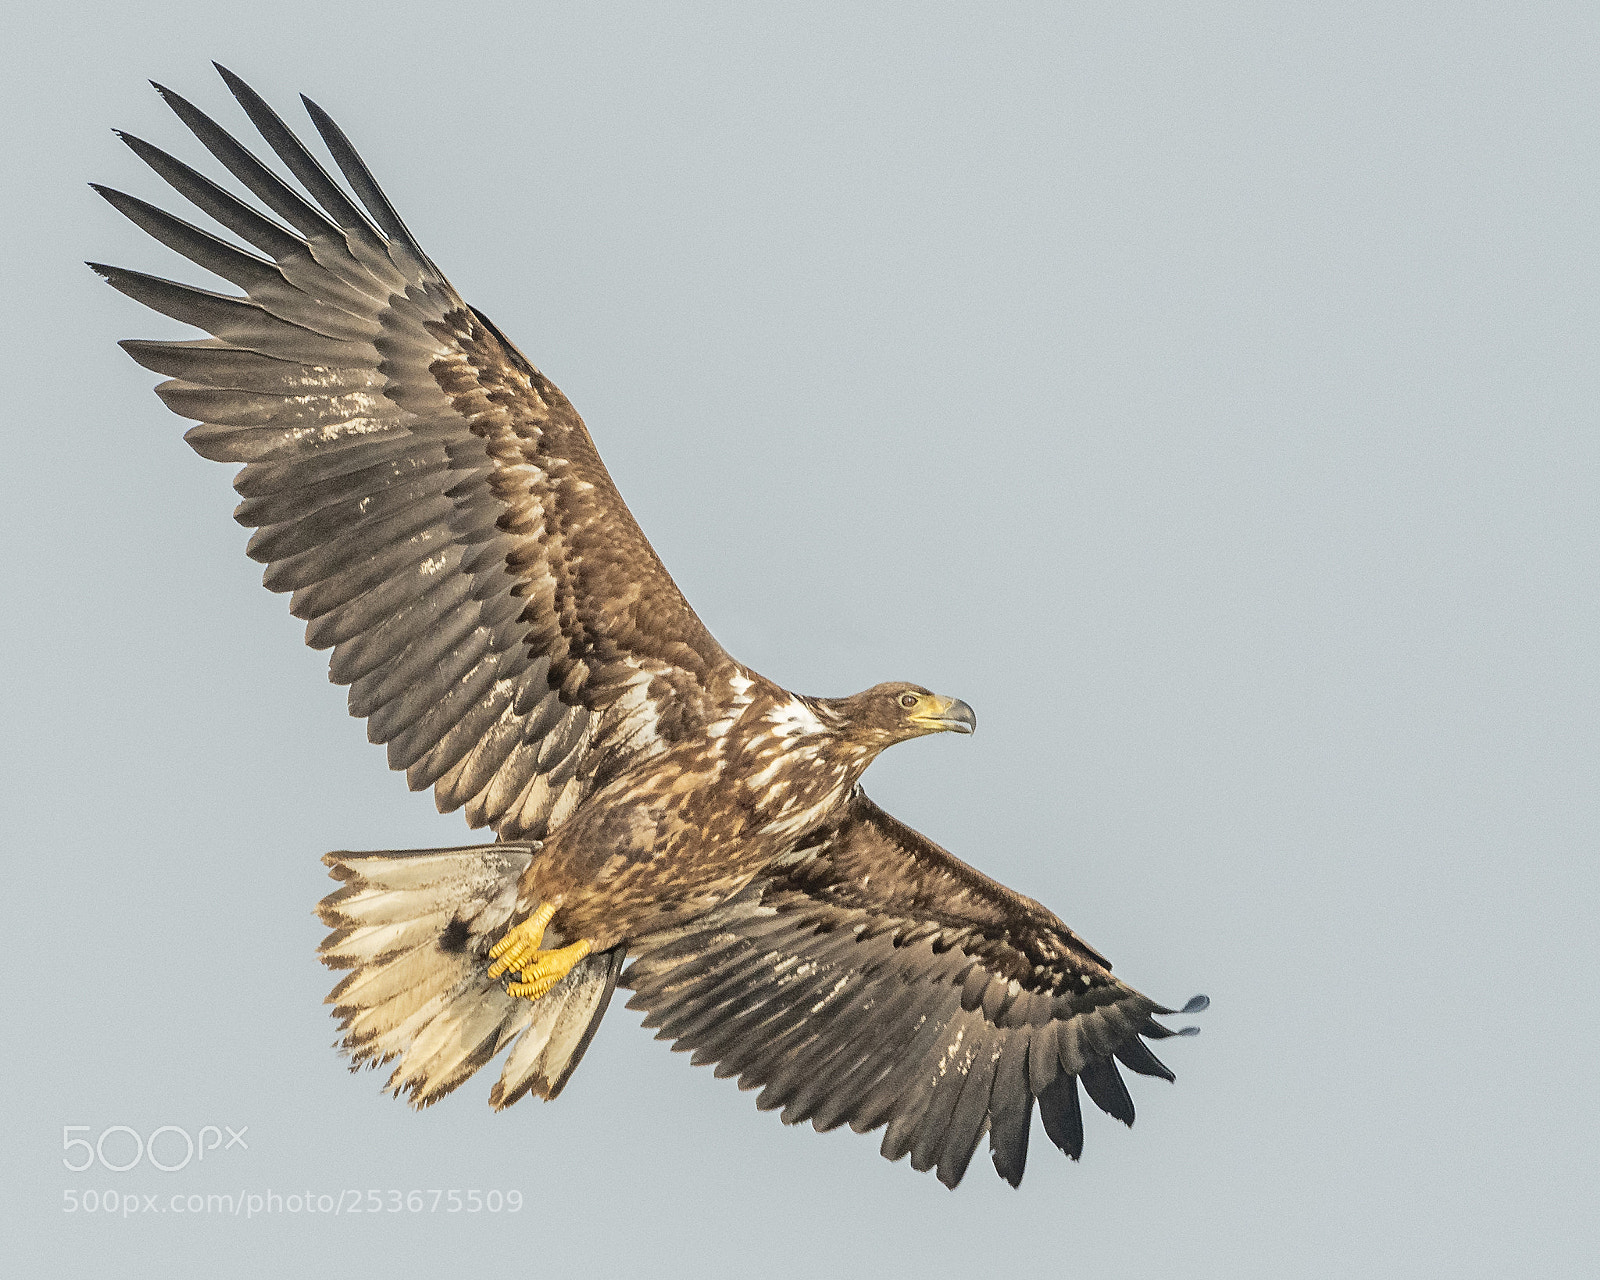 Nikon D500 sample photo. White-tailed eagle in flight photography